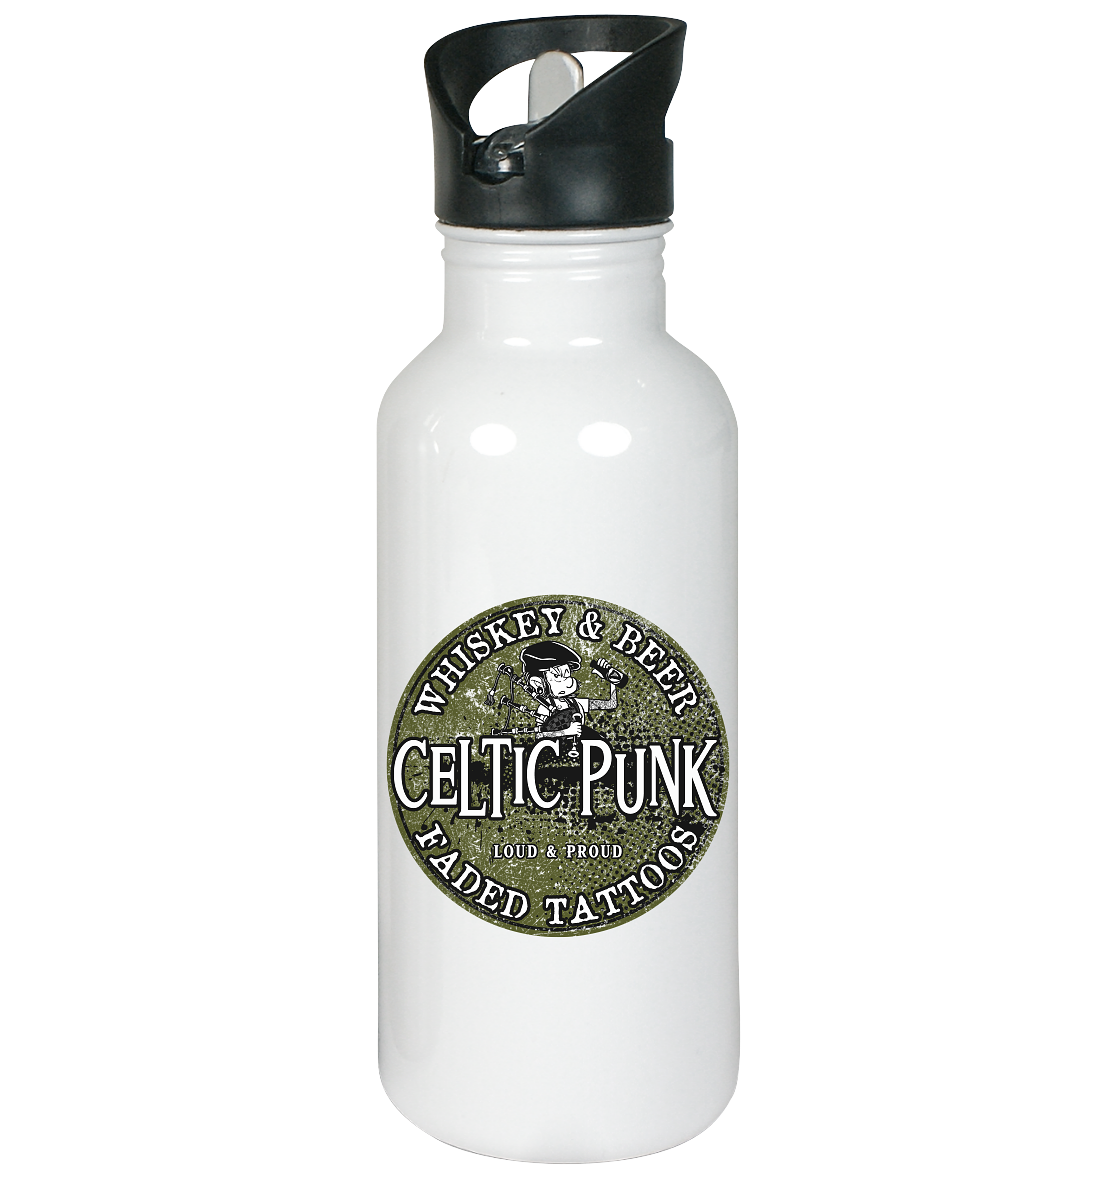 Celtic Punk "Whiskey, Beer & Faded Tattoos" - Edelstahl-Trinkflasche